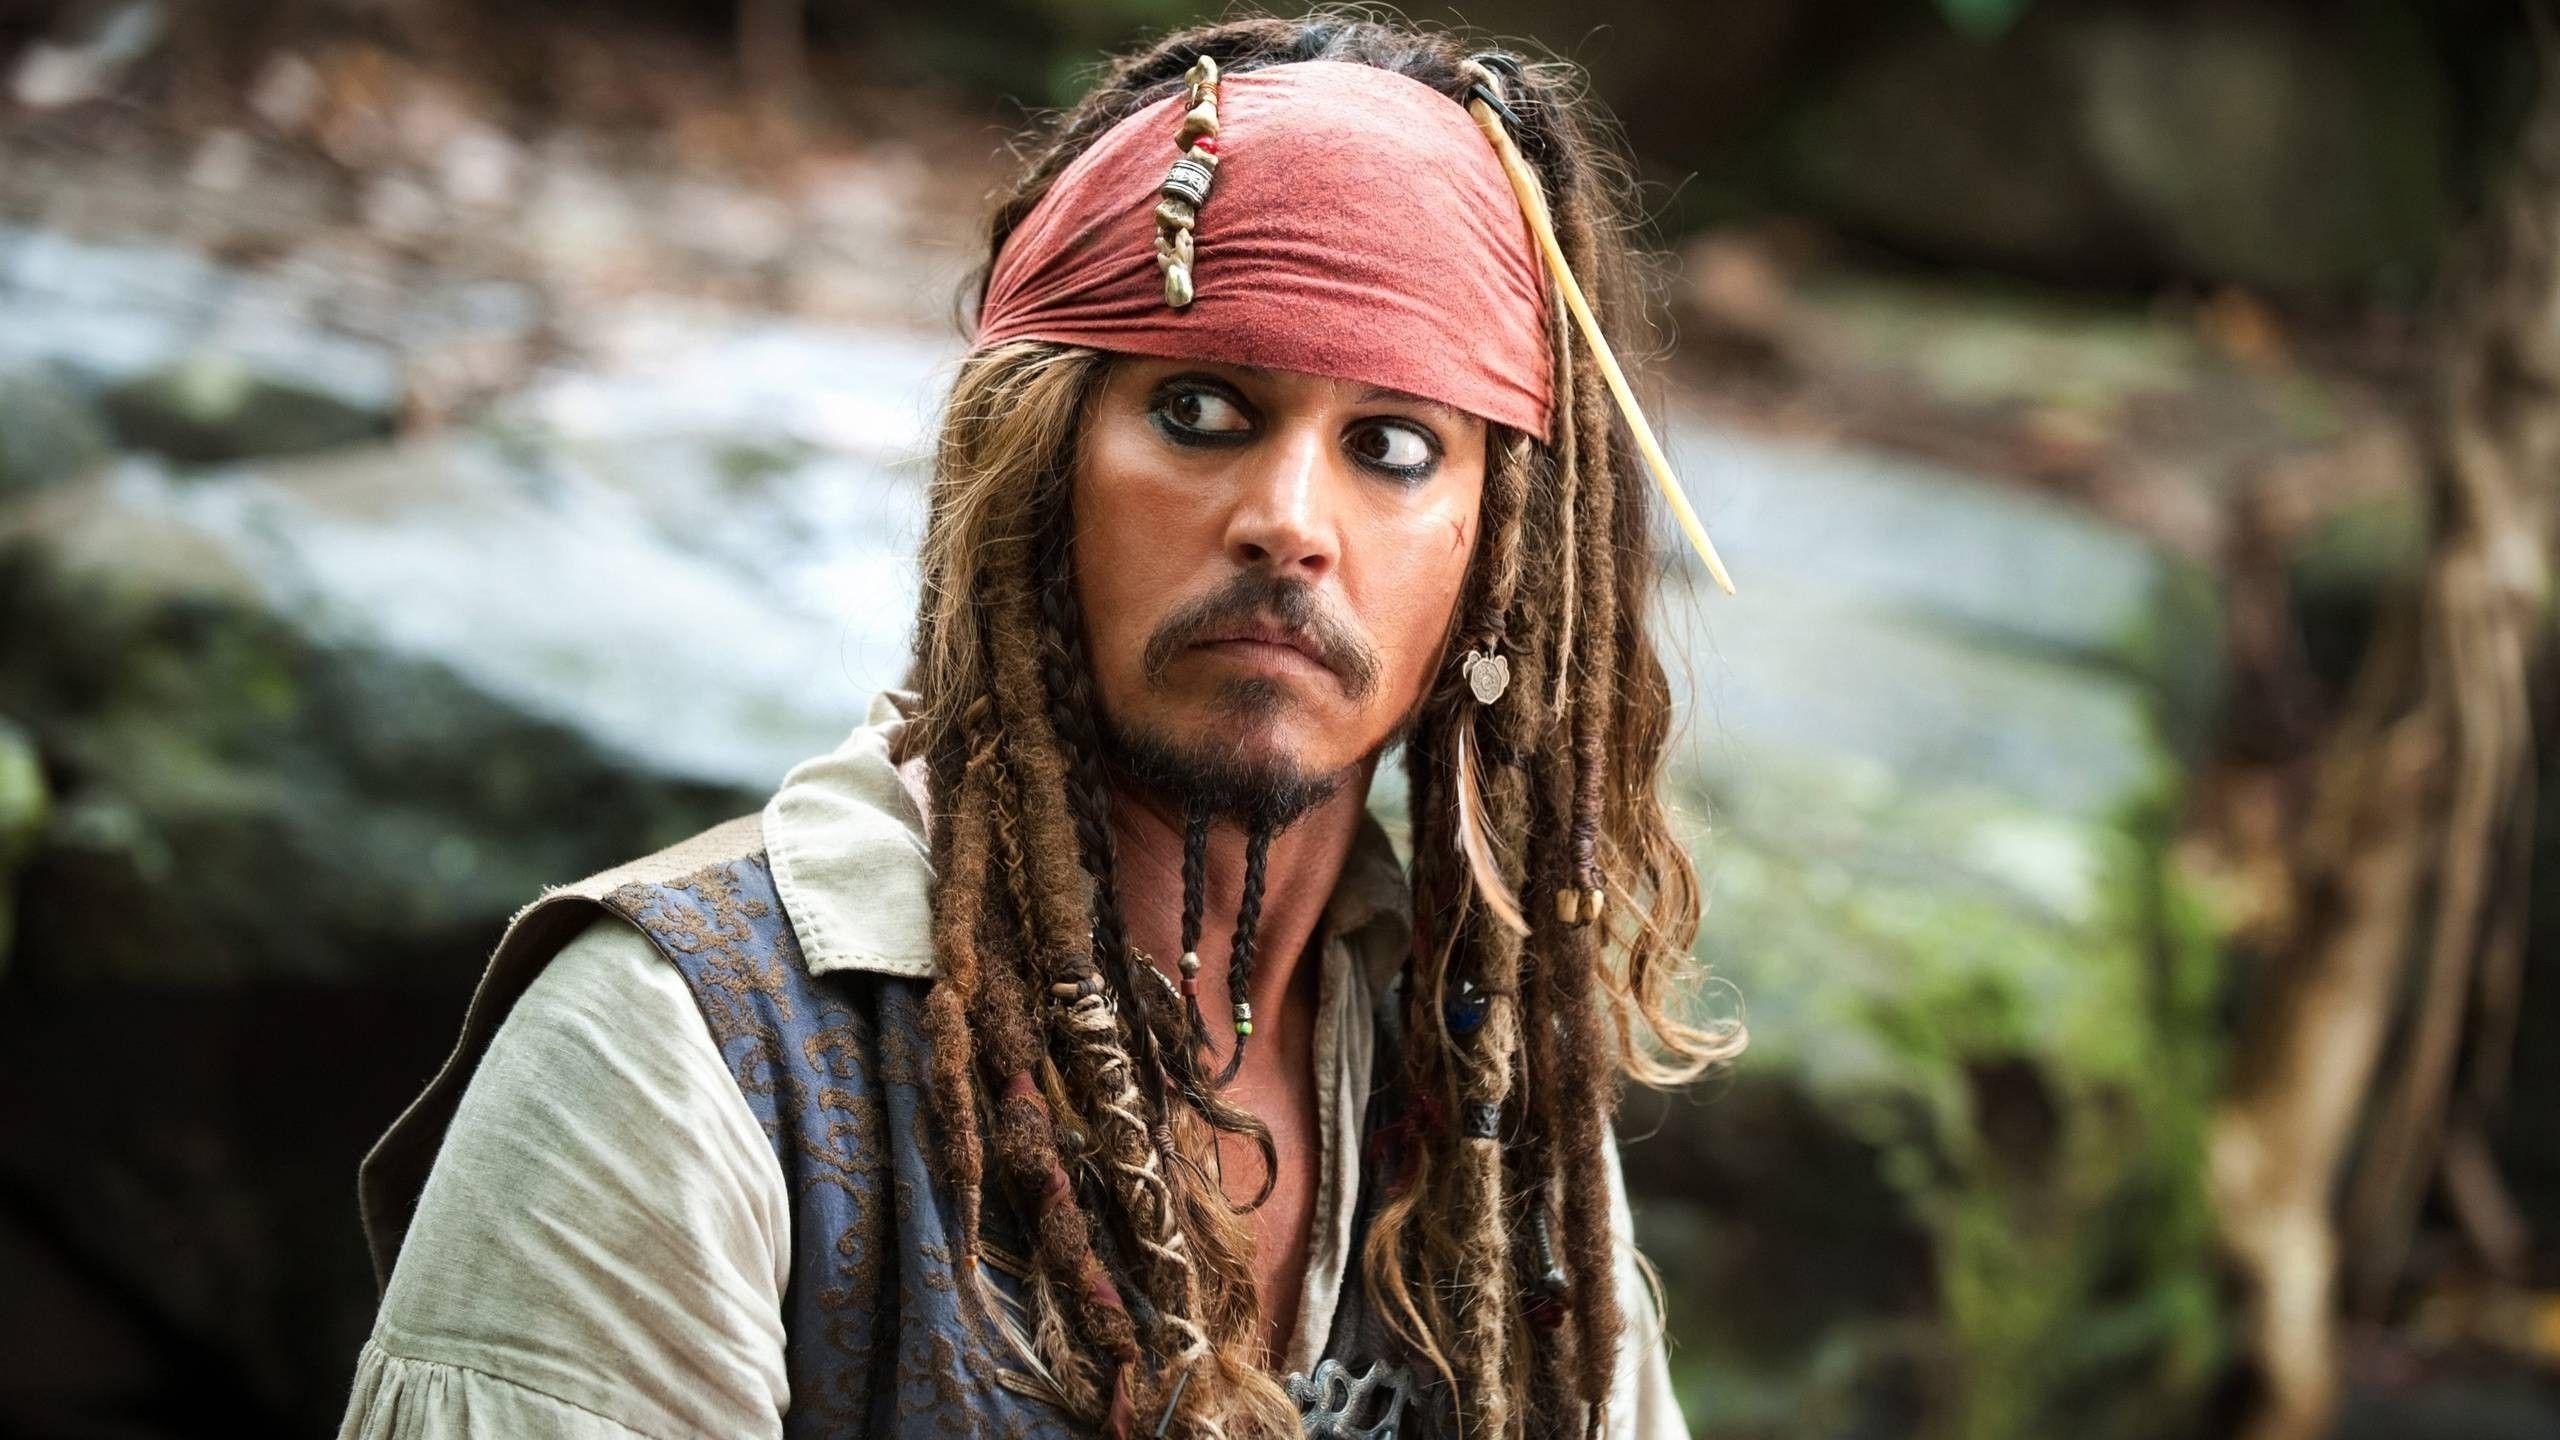 Jack Sparrow Live Wallpaper, image collections of wallpaper